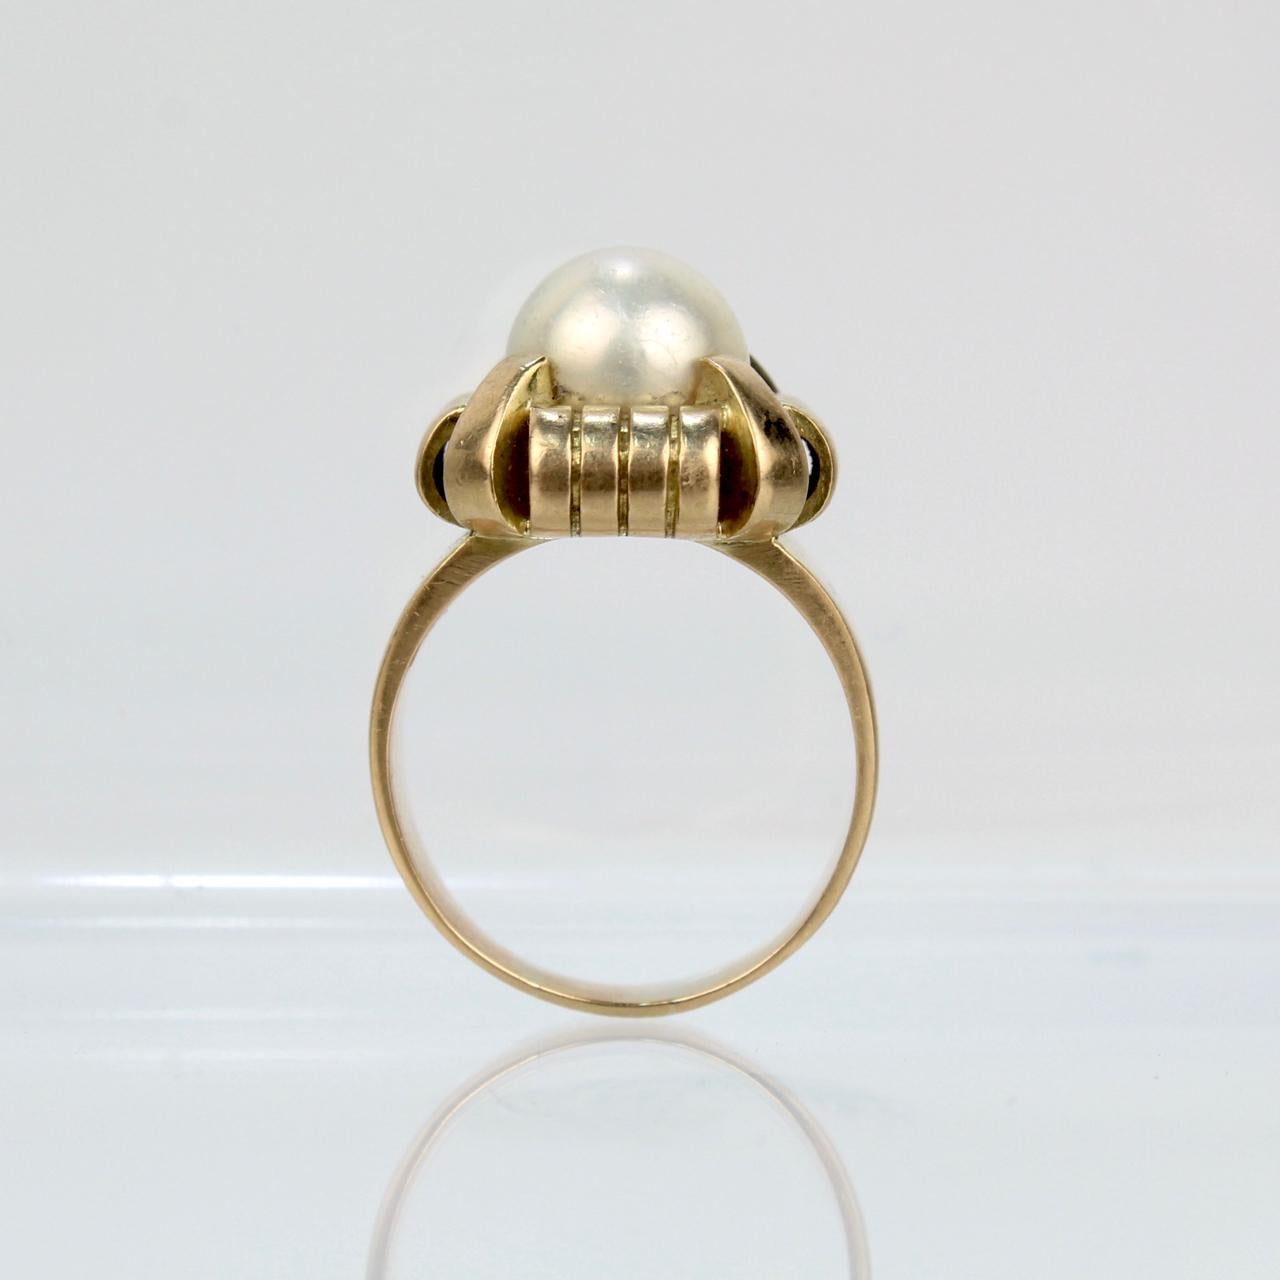 Antique French Art Deco 18 Karat Gold & Pearl Cocktail Ring For Sale 2